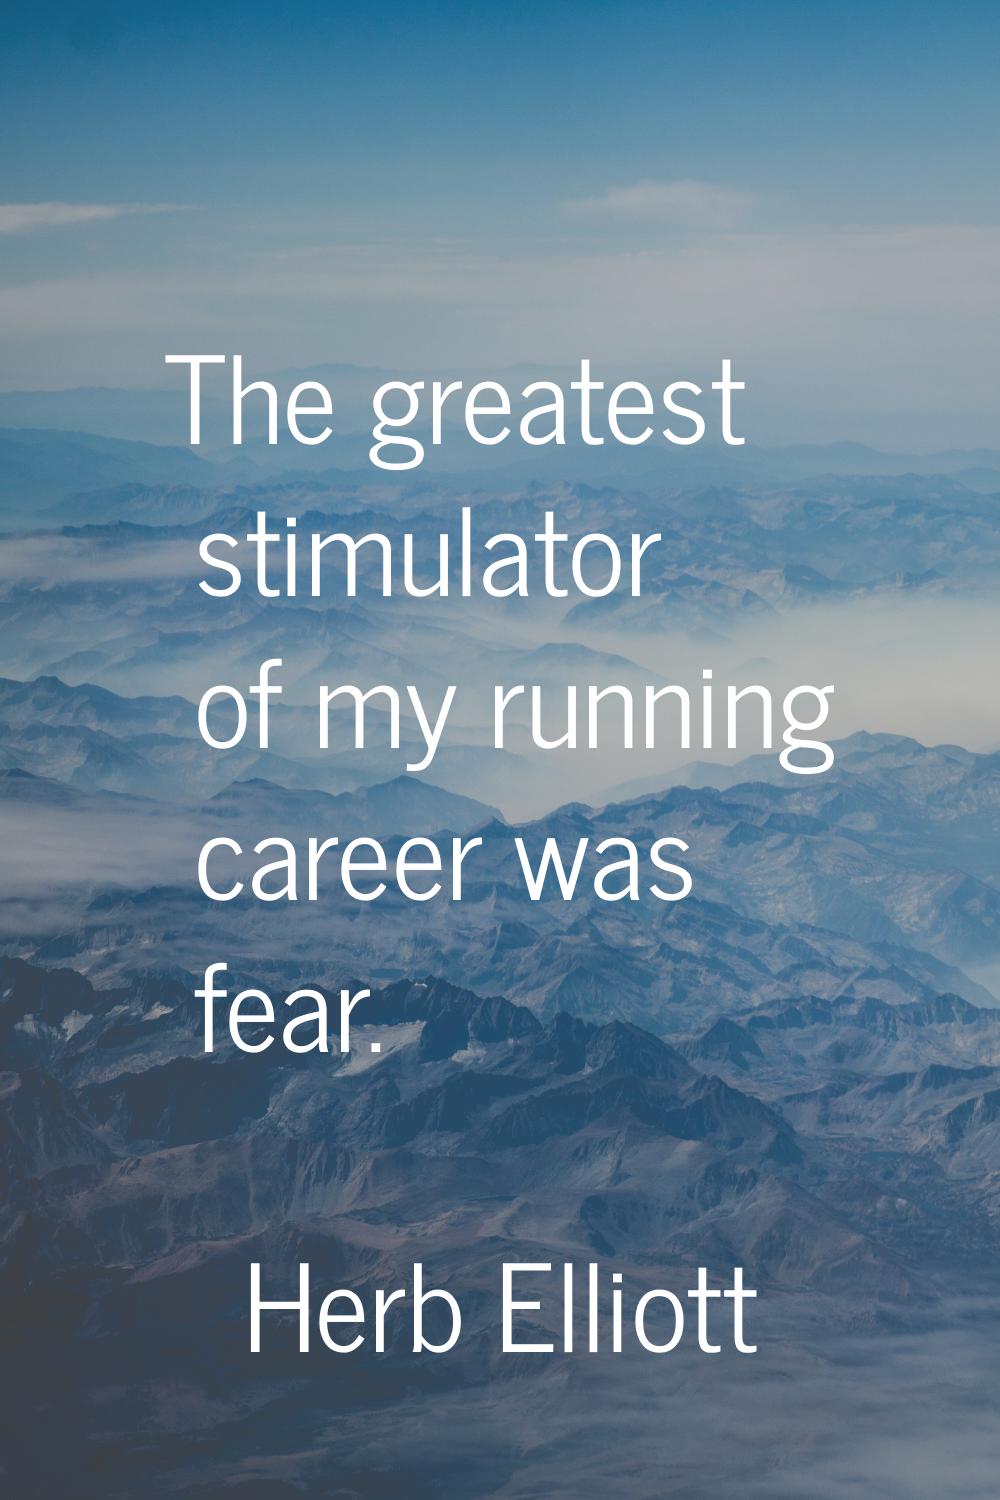 The greatest stimulator of my running career was fear.